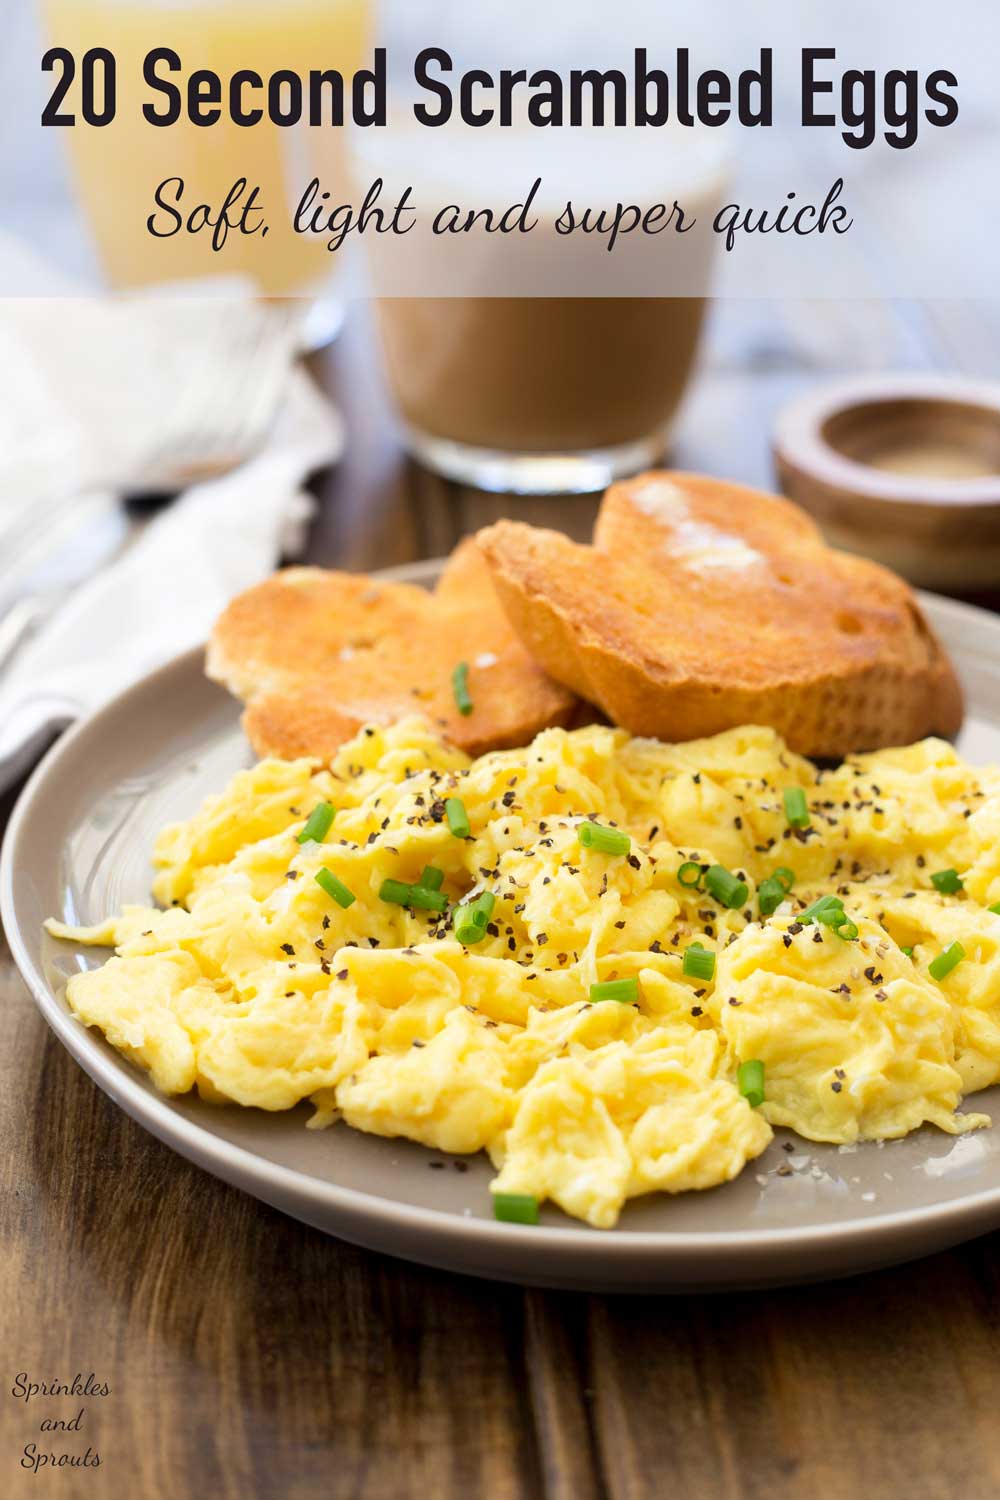 Scrambled eggs on a grey plate with toast and coffee in the background